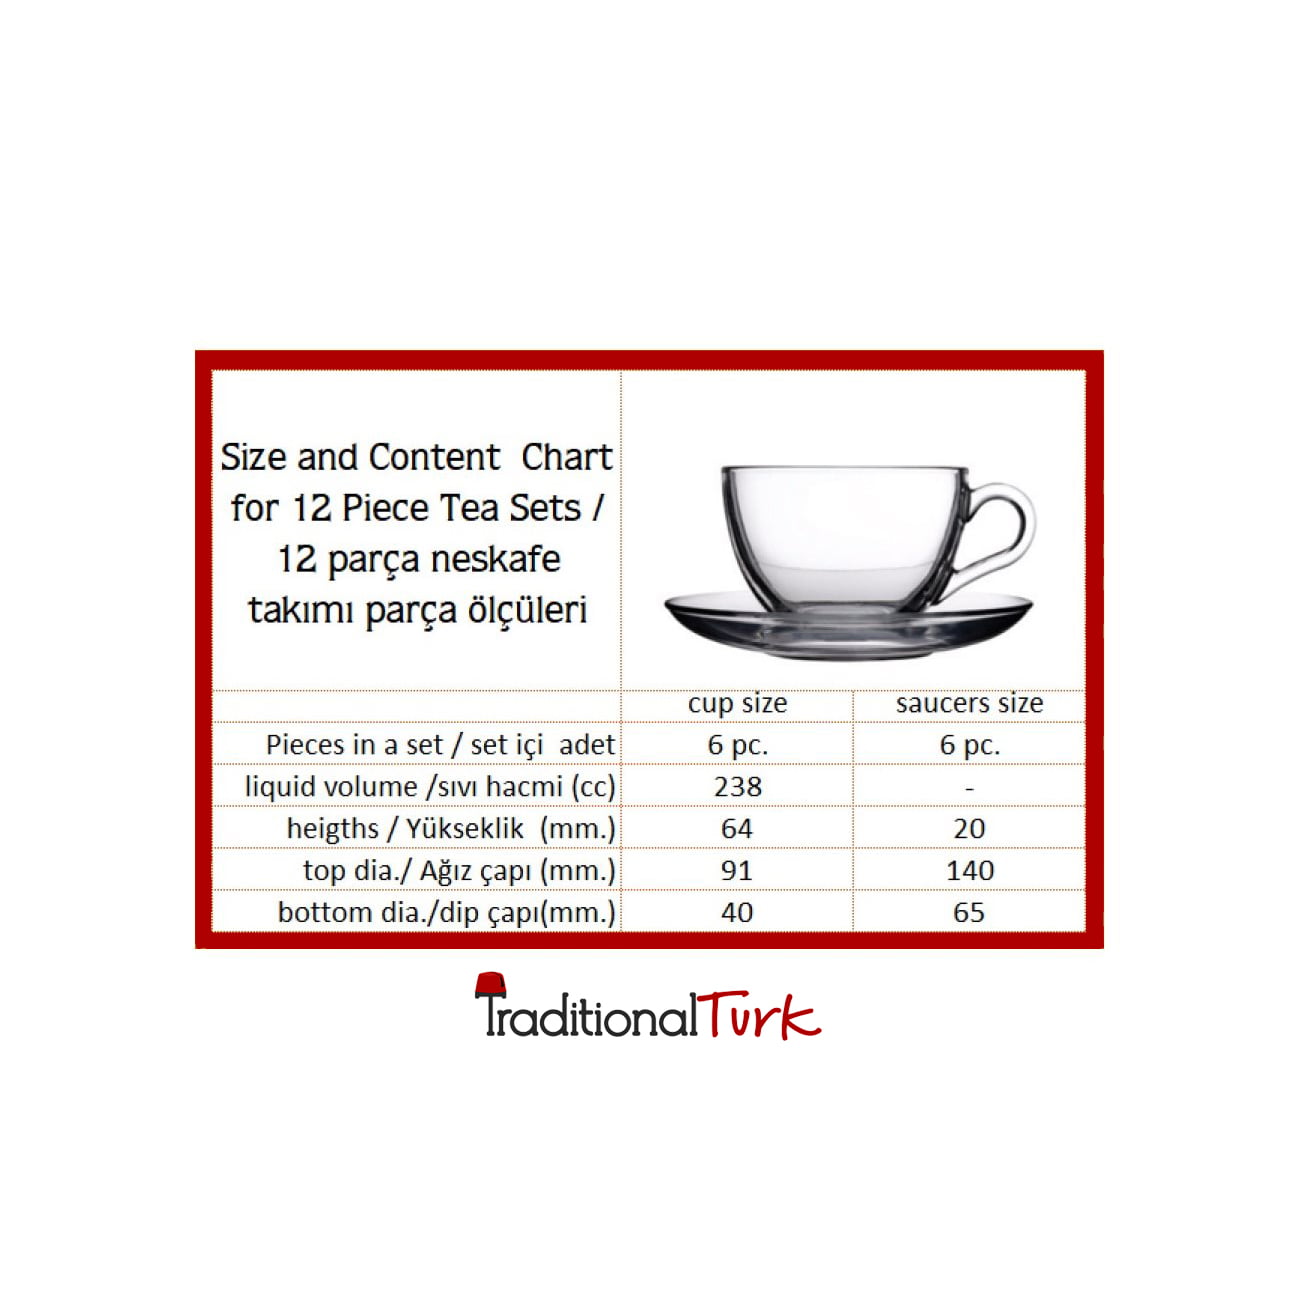 What Is The Volume (in cc) Of A Cup Size?